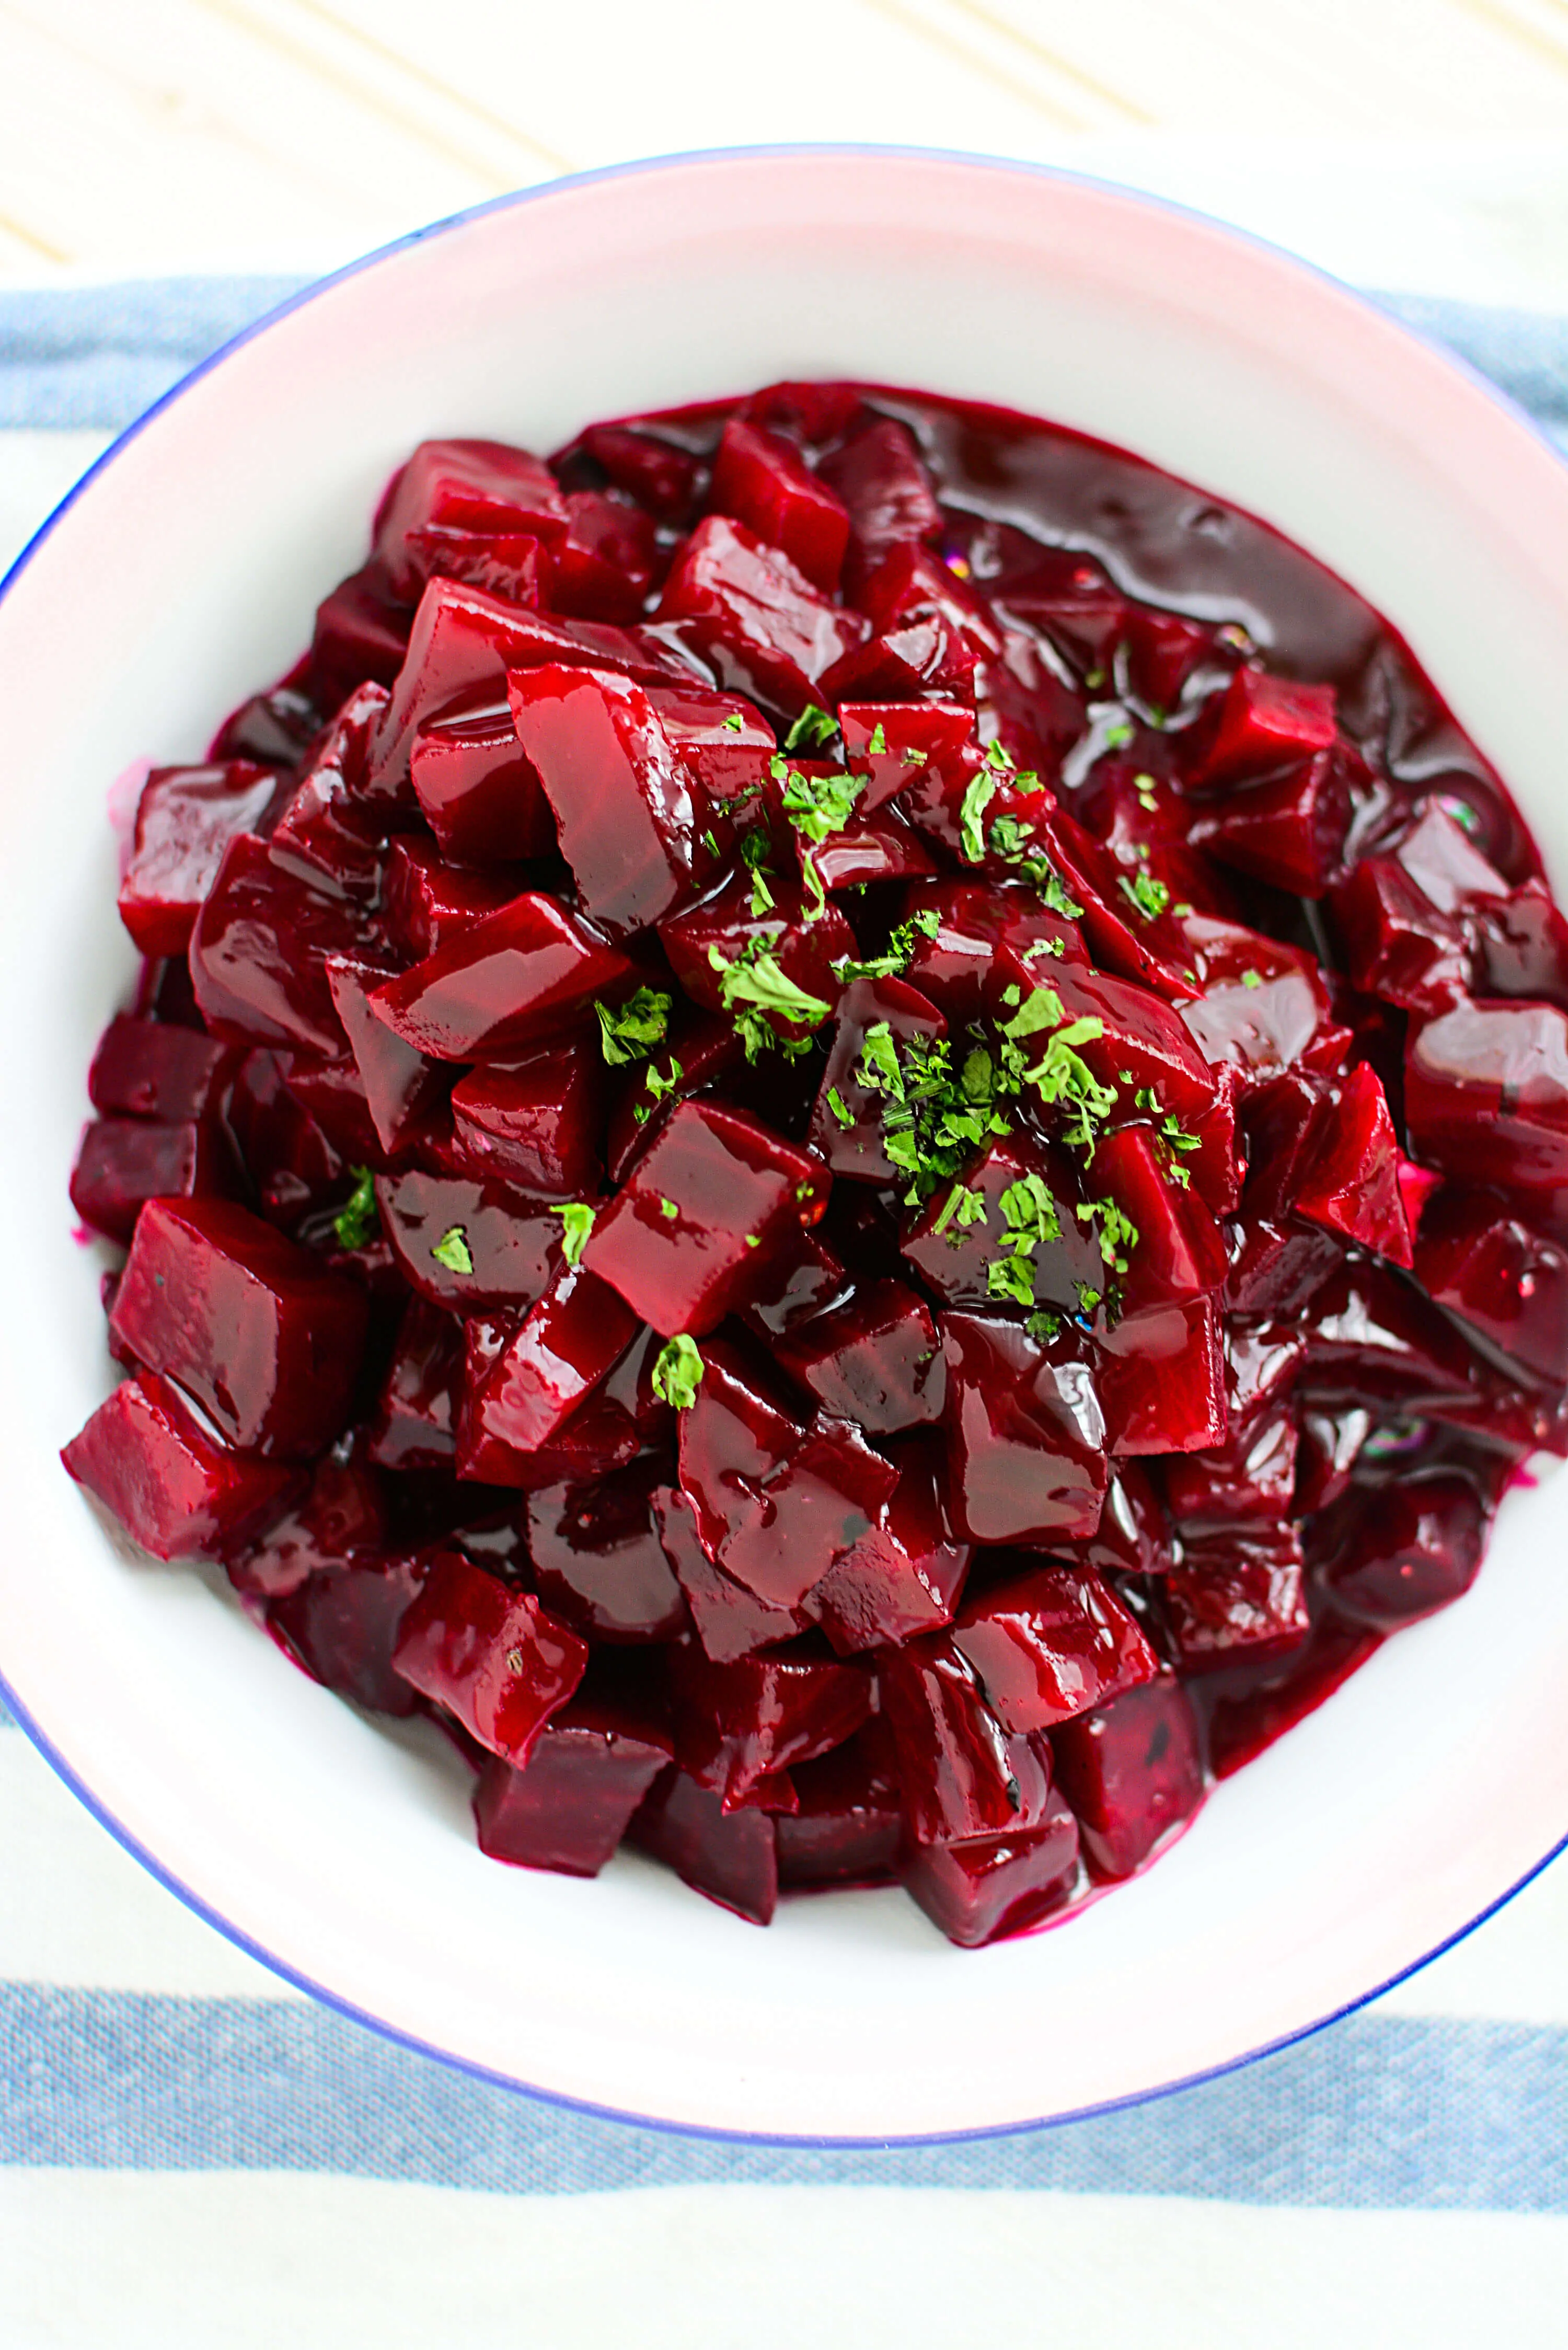 A bowl of harvard beets in a blue and white napkin.